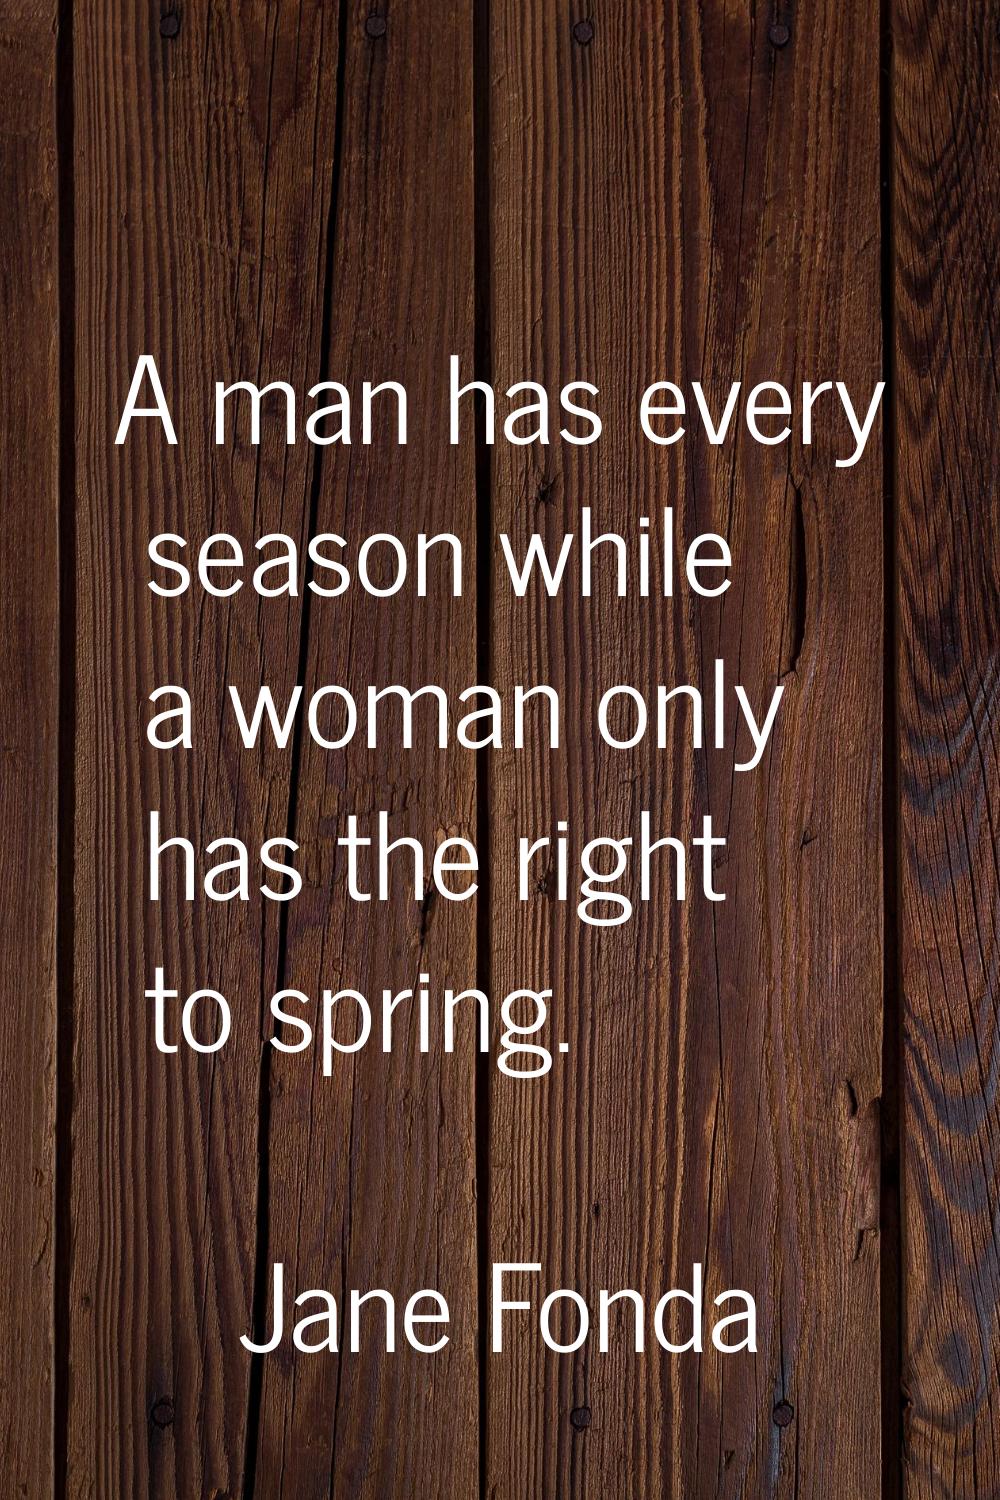 A man has every season while a woman only has the right to spring.